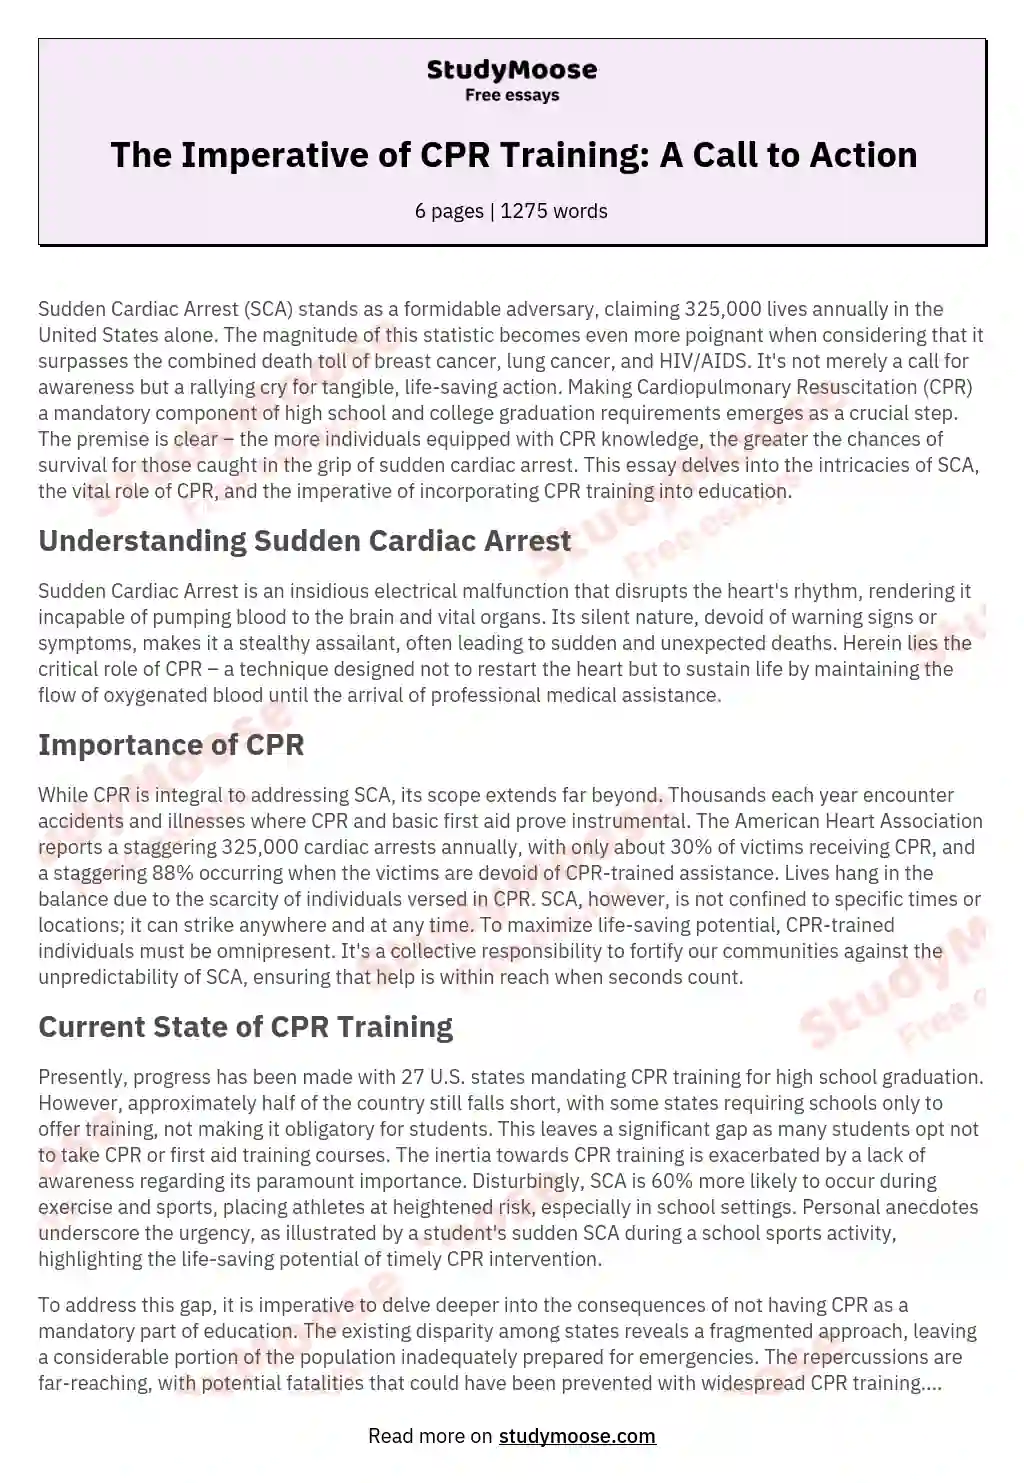 The Imperative of CPR Training: A Call to Action essay